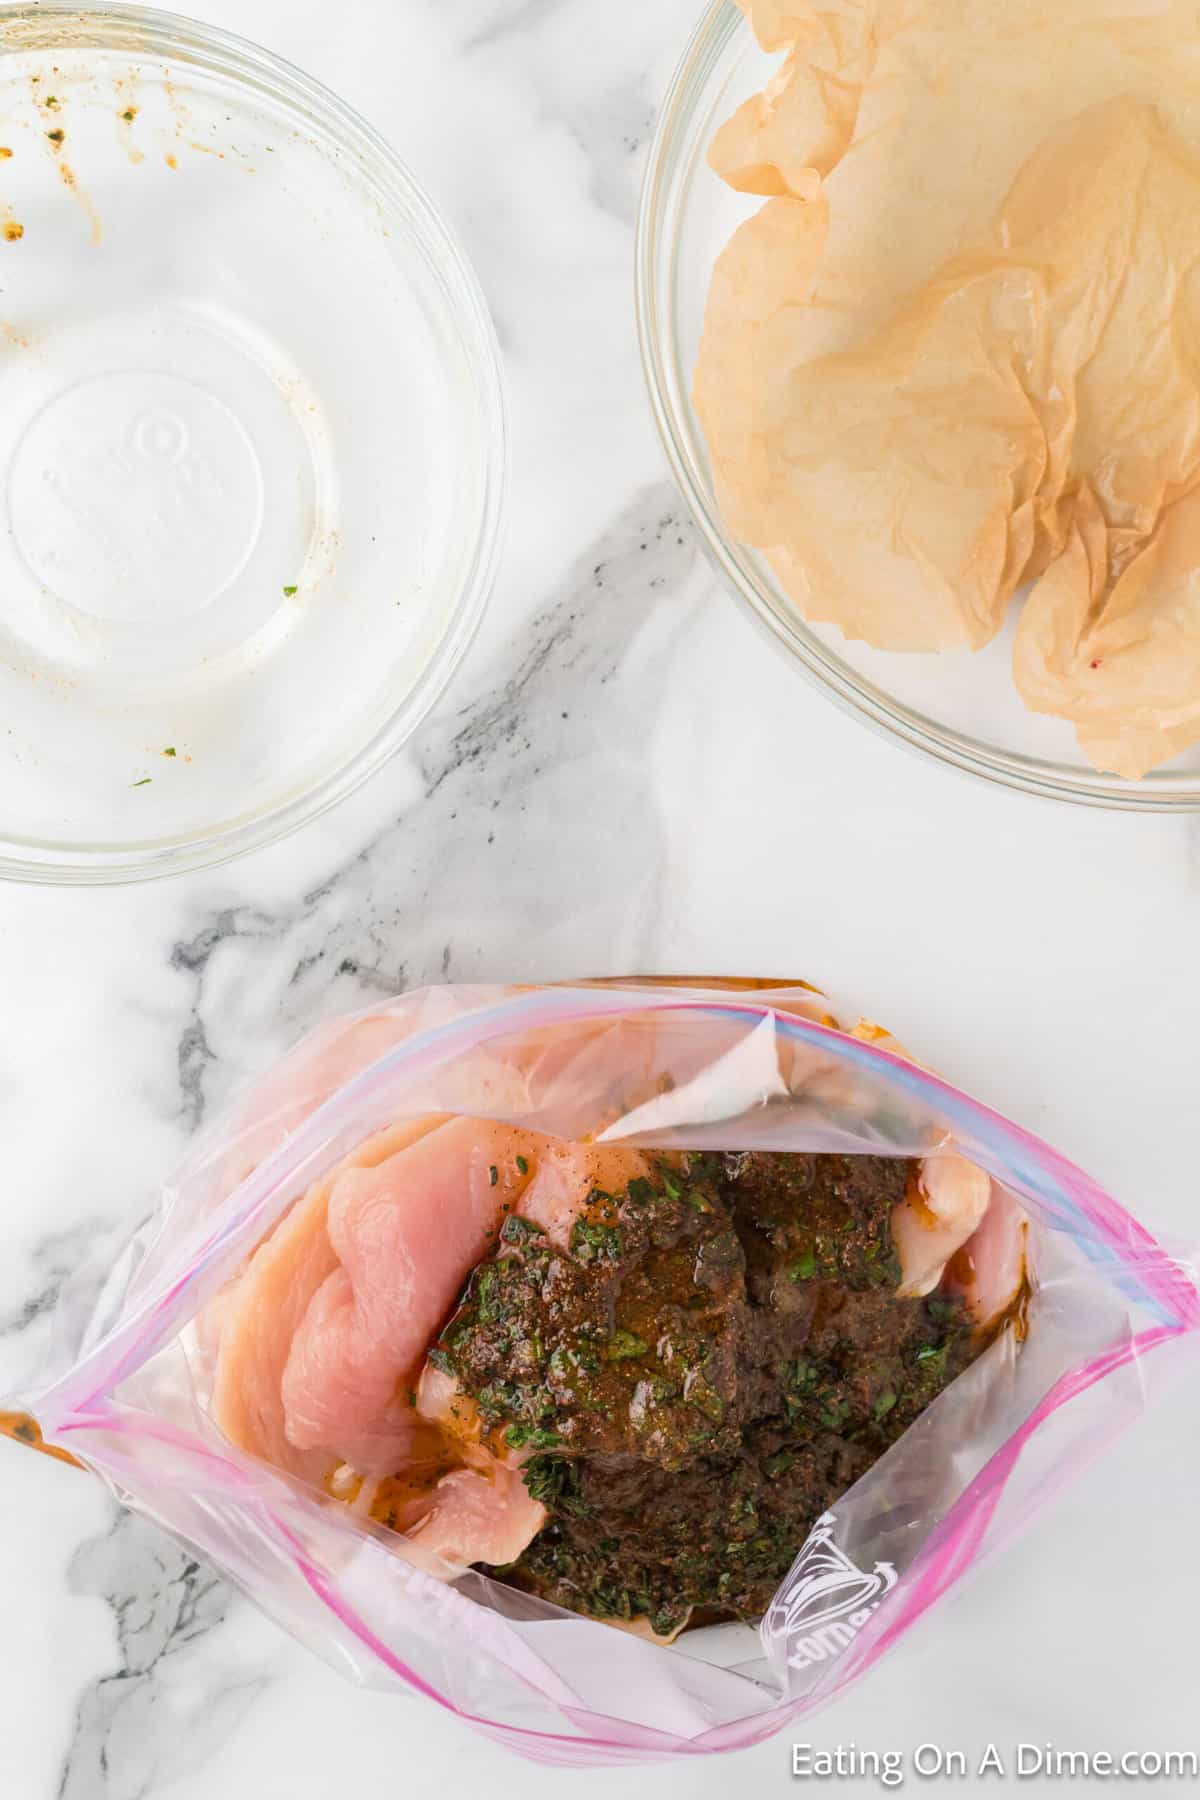 Placing chicken in a ziplock bag with the marinade